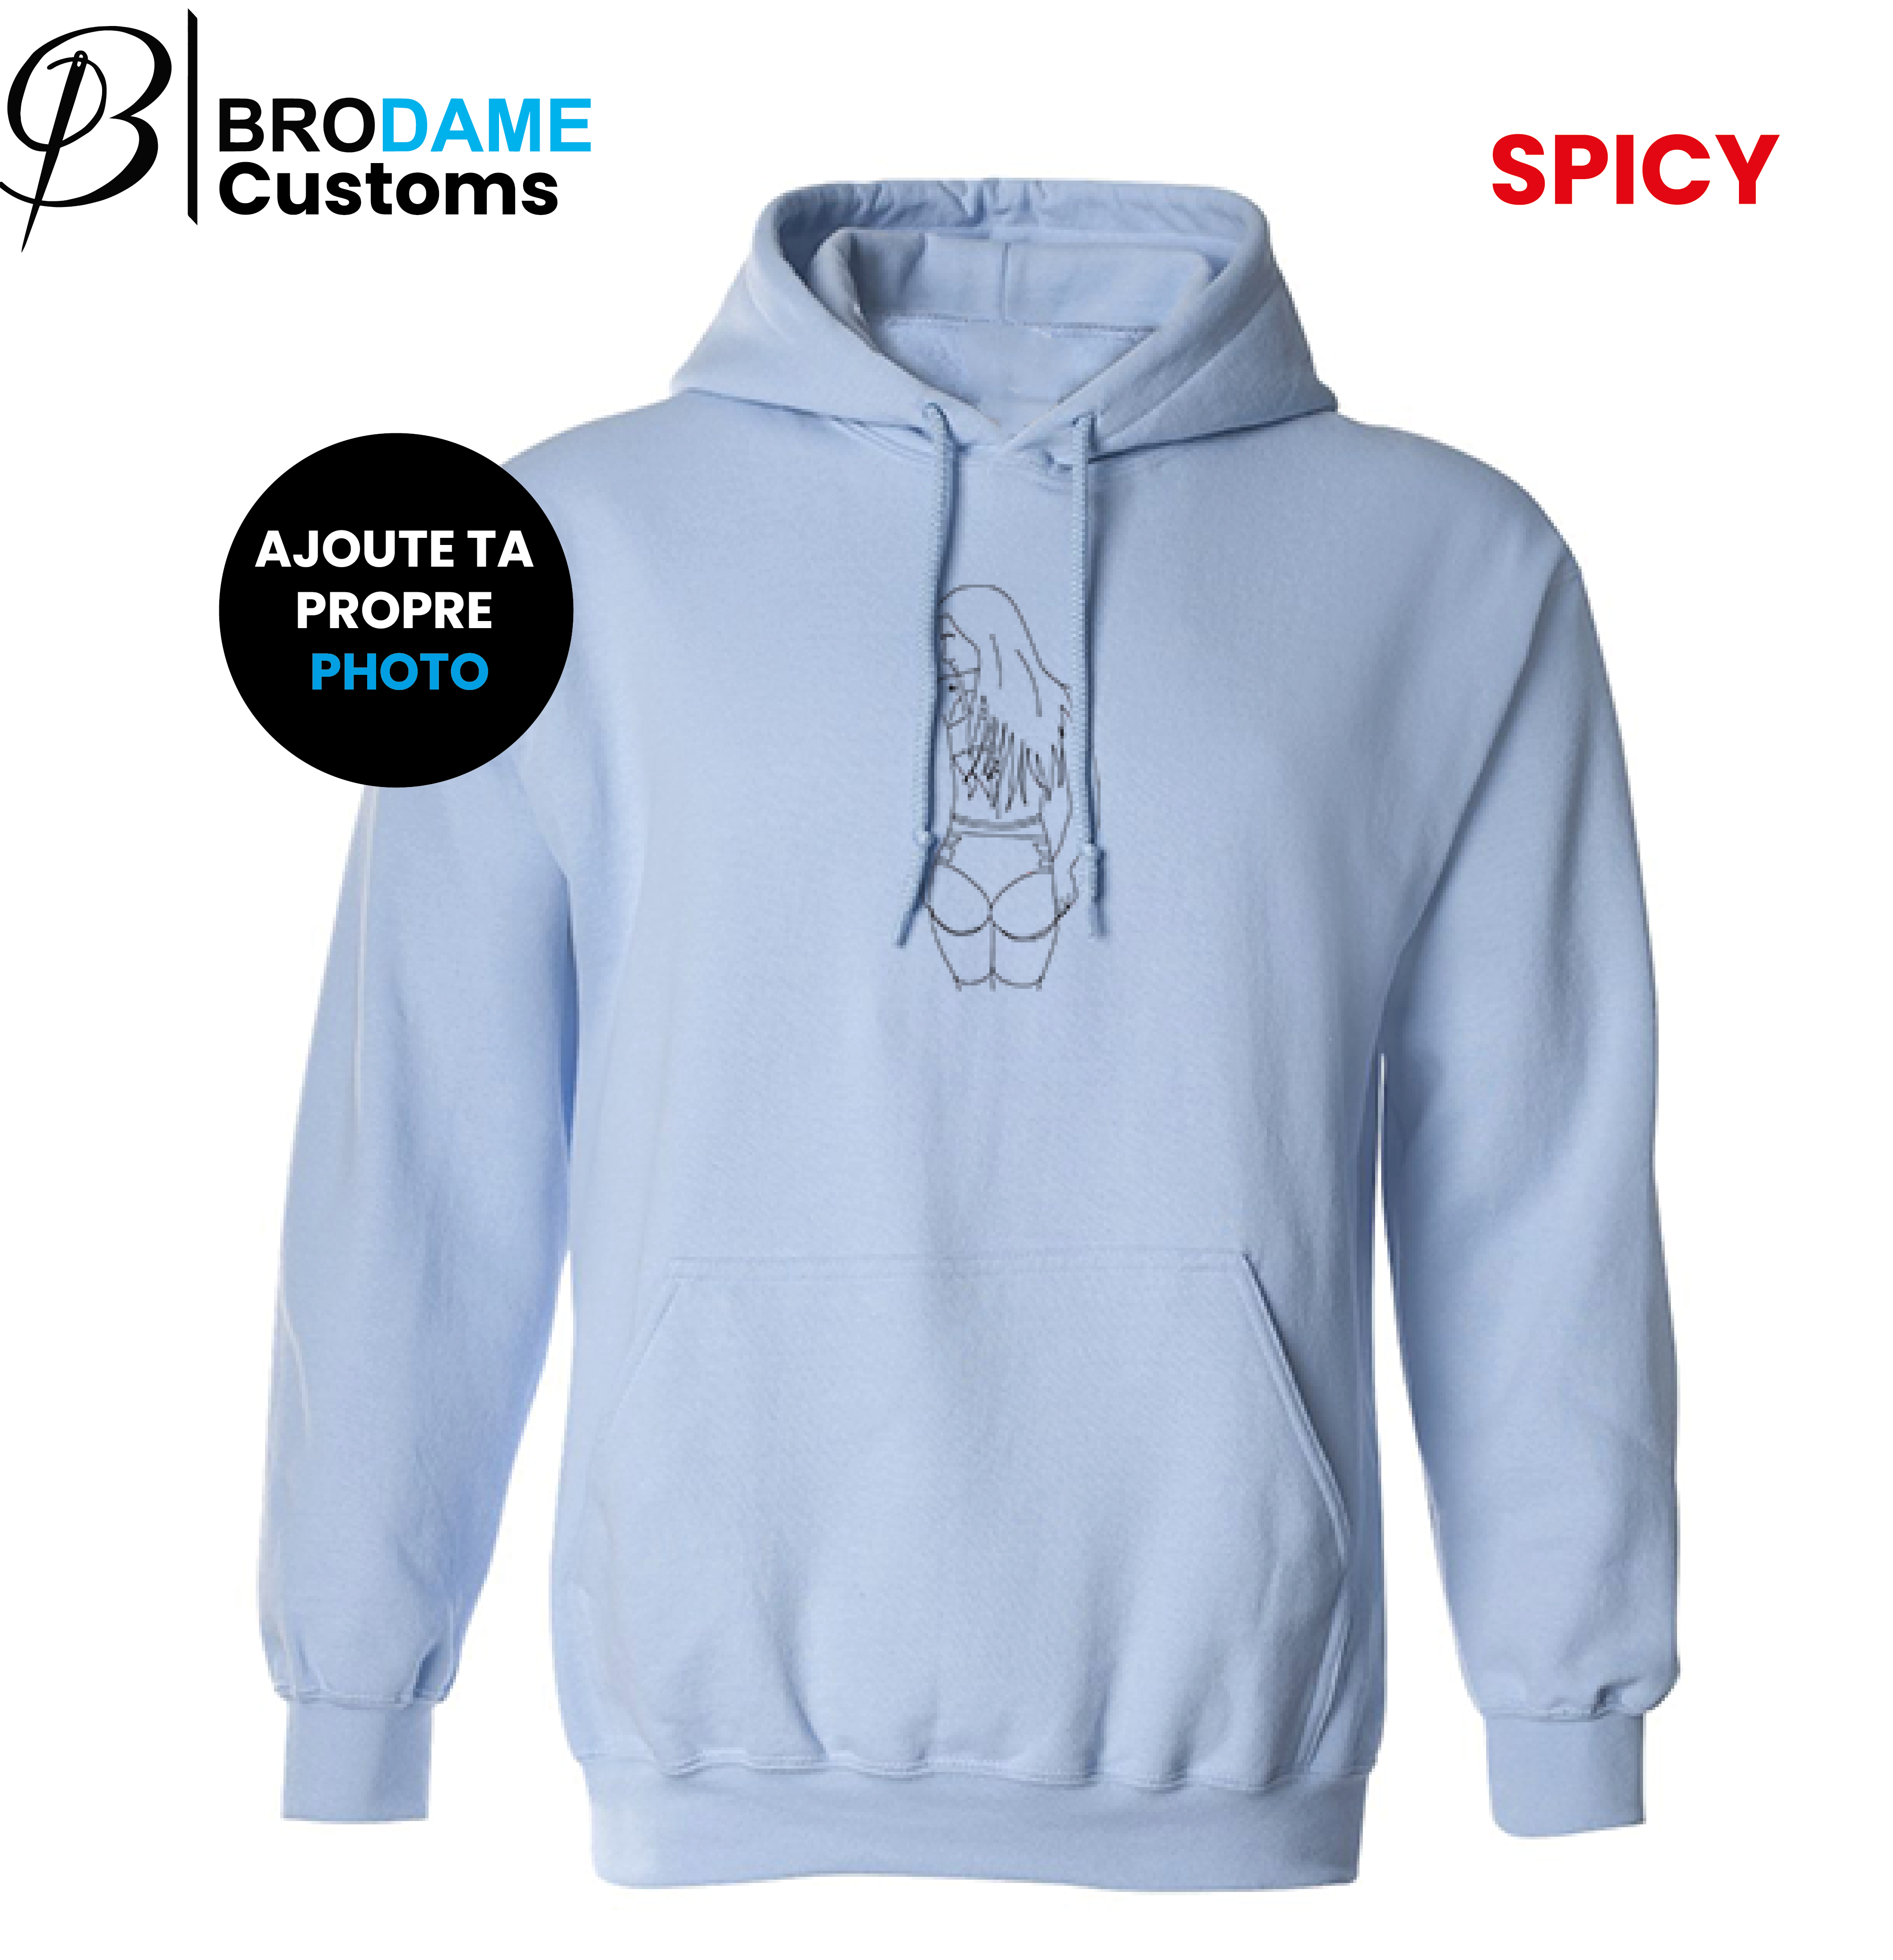 SPICY silhouette hoodie